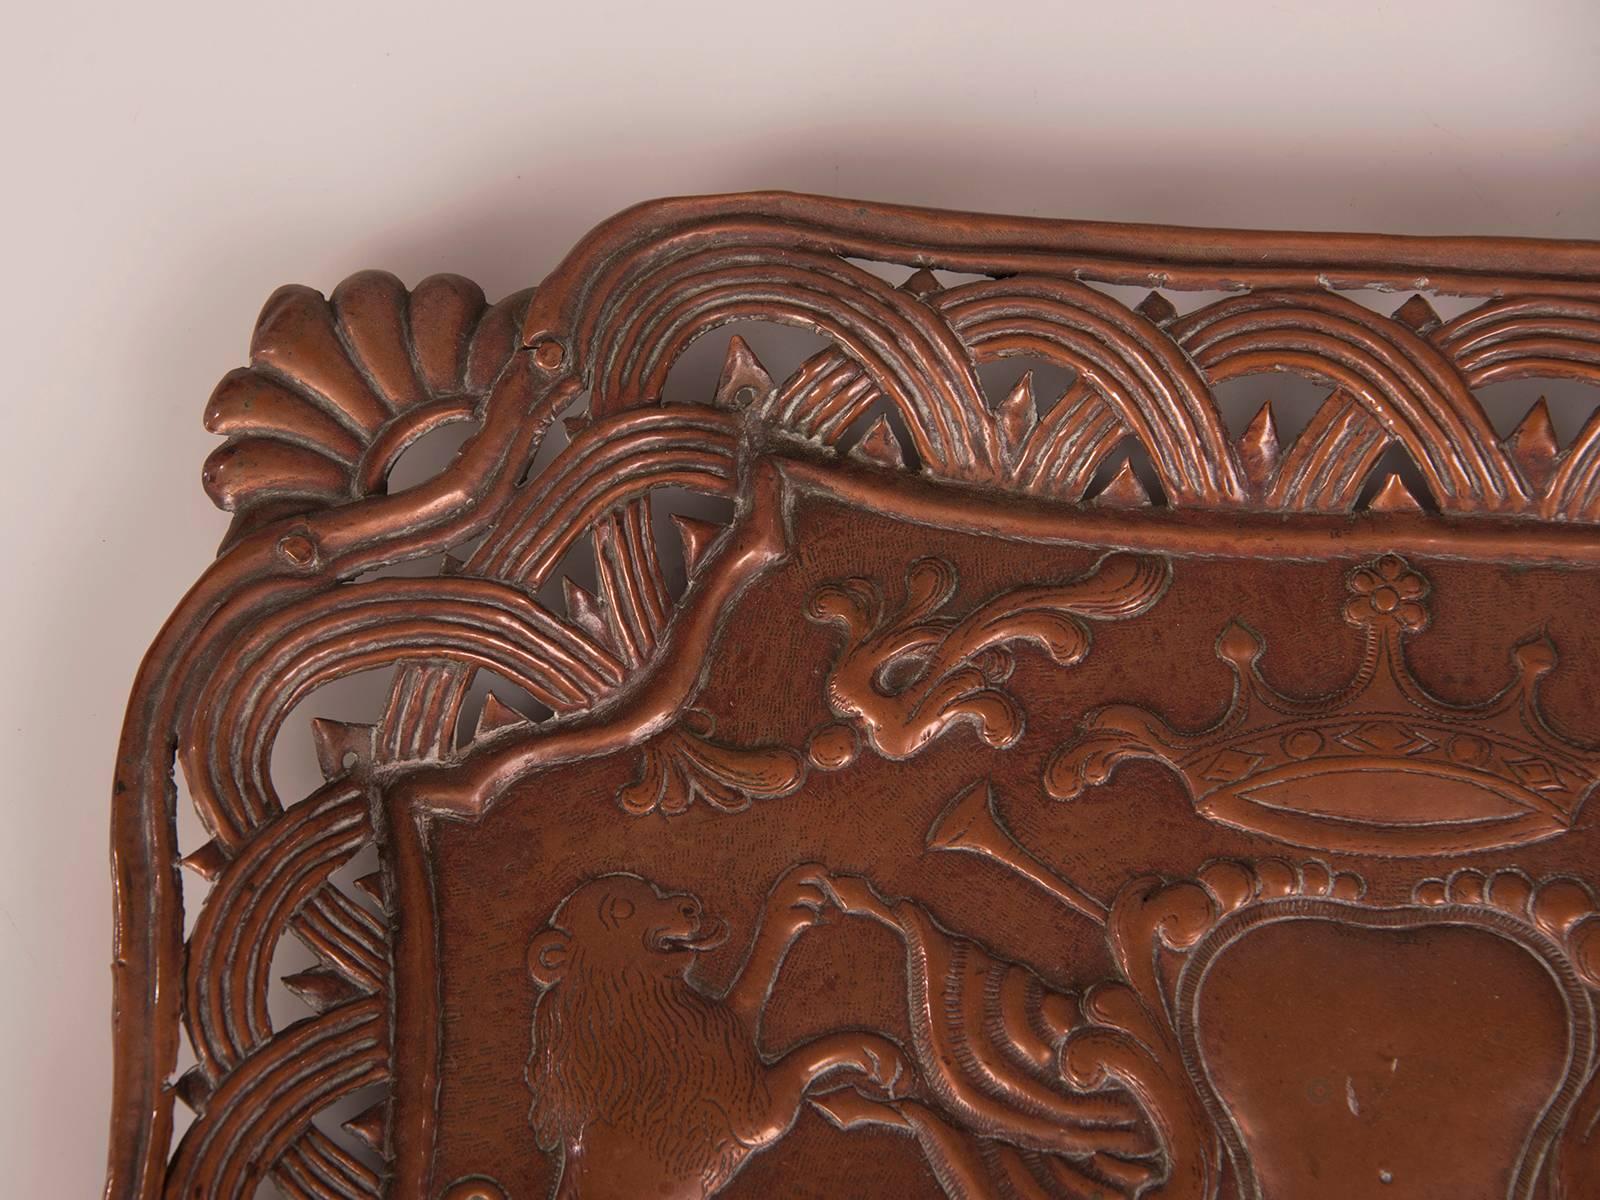 Receive our new selections direct from 1stdibs by email each week. Please click on “Follow Dealer” button below and see them first!

This antique French pressed copper rectangular tray circa 1890 features a pair of heraldic lions rampant beneath a